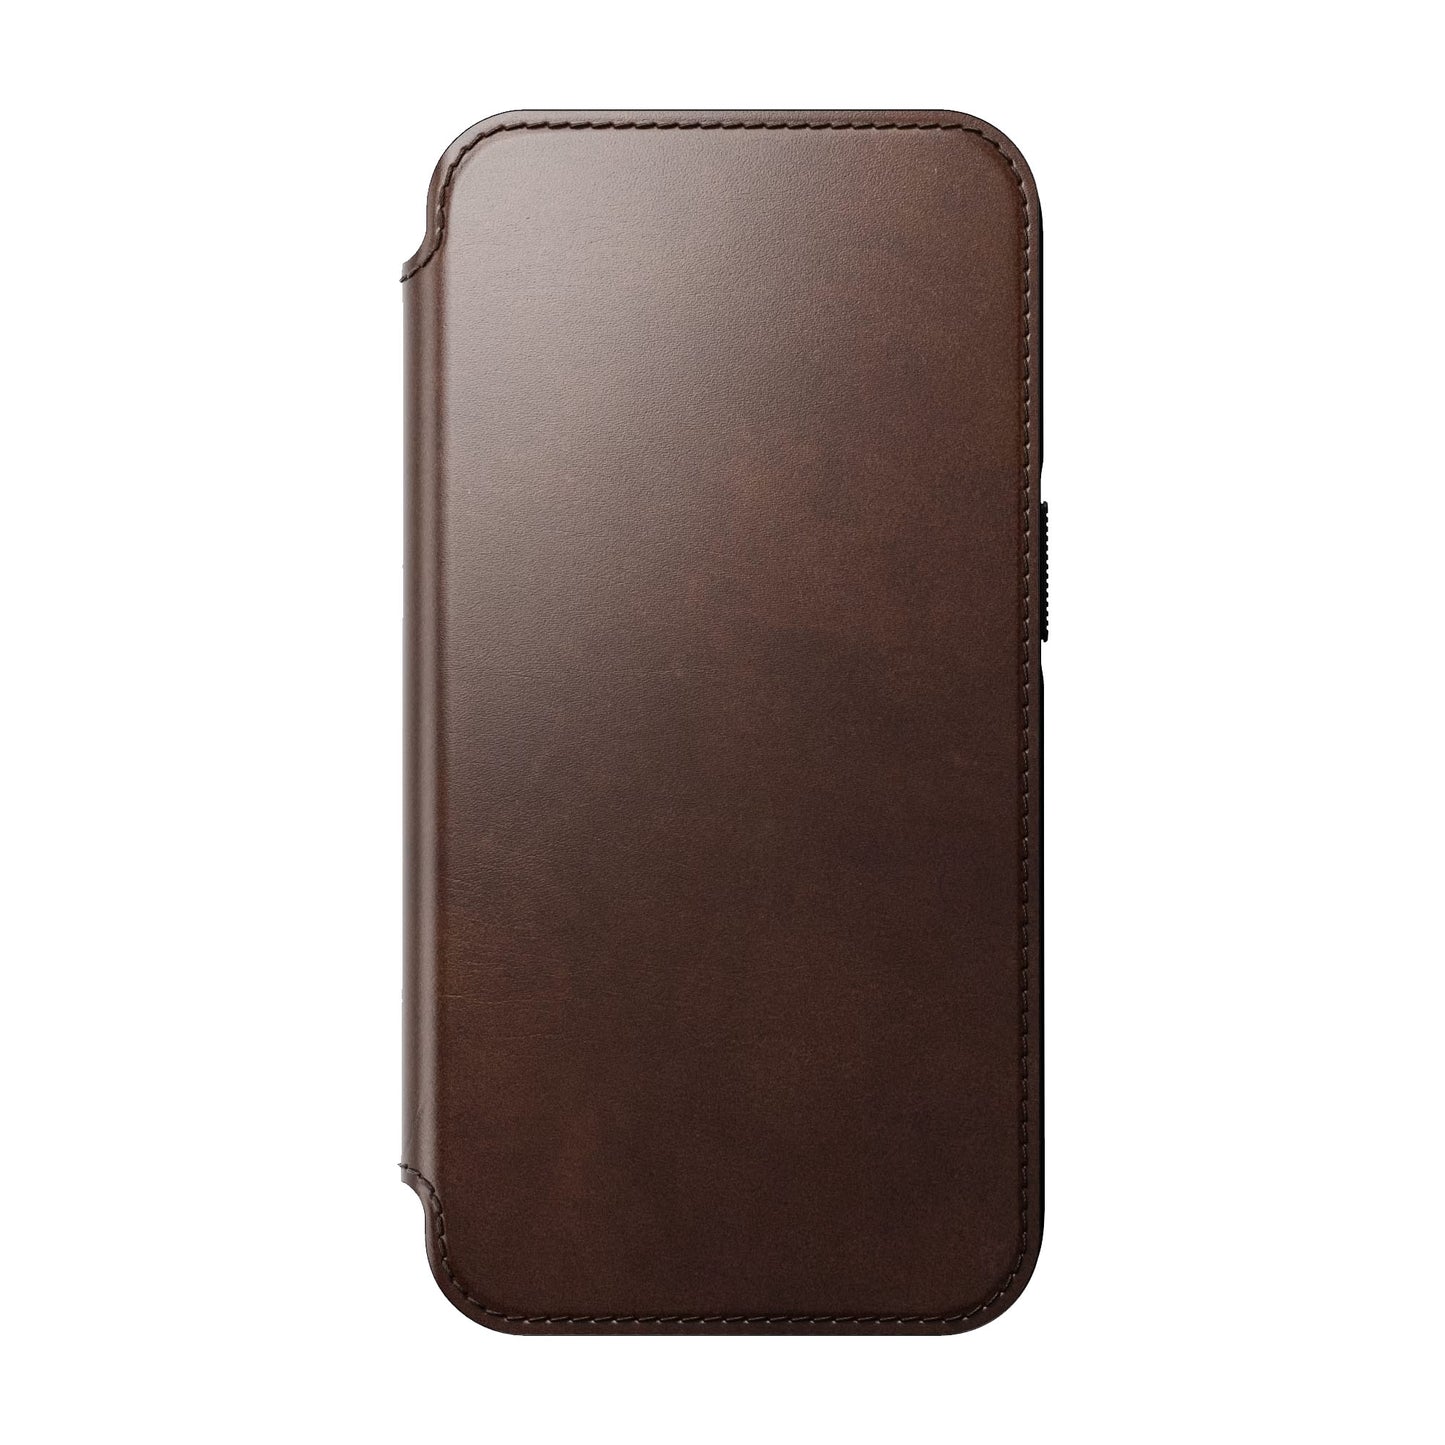 [ONLINE EXCLUSIVE] Nomad Modern Leather Folio Horween Case for iPhone 14 Pro Max - MagSafe Compatible - Rustic Brown (Barcode: 856500012339 )